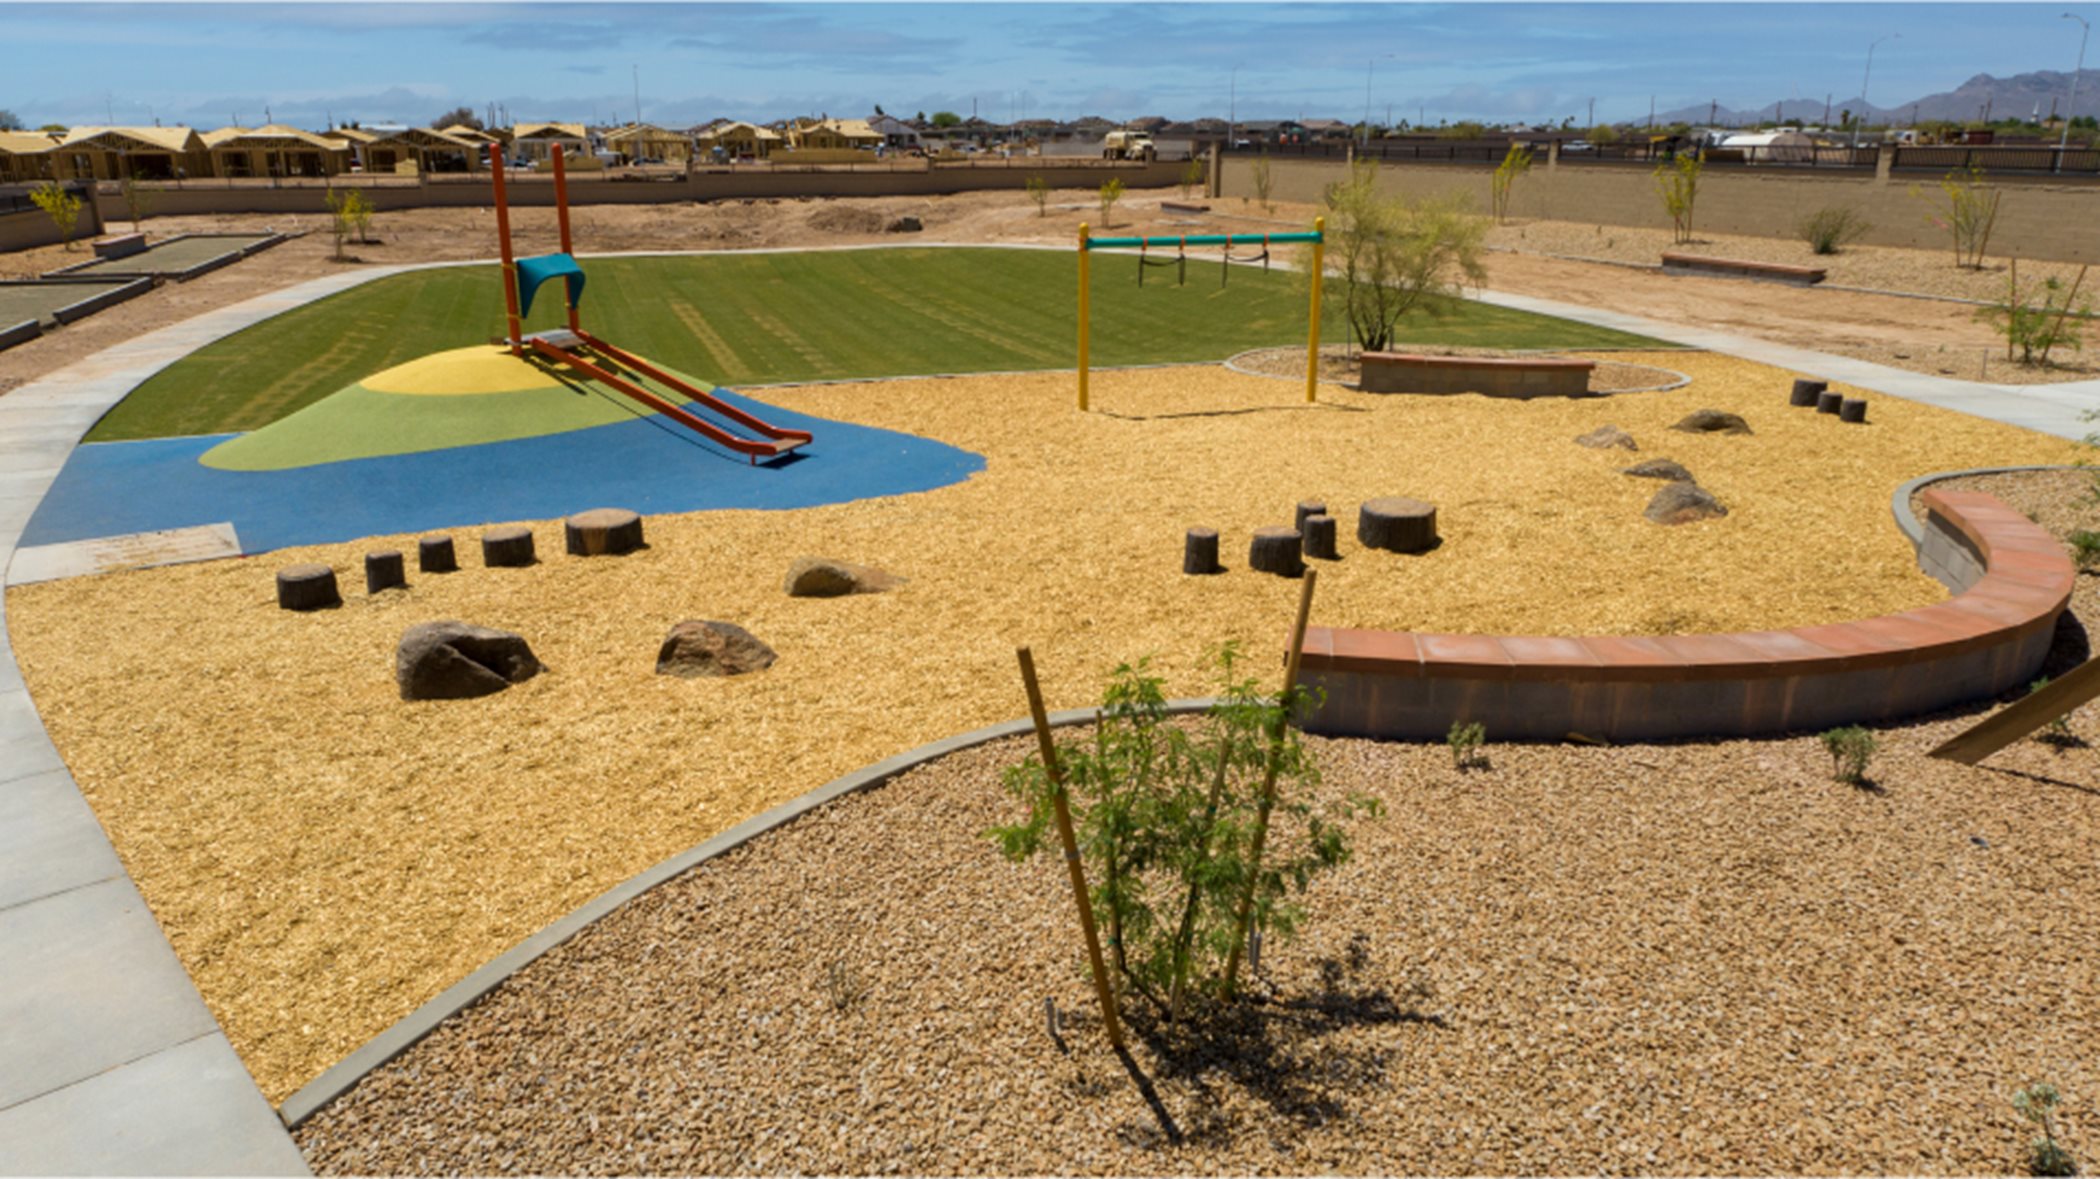 View of opposite side of playground with green space in the background